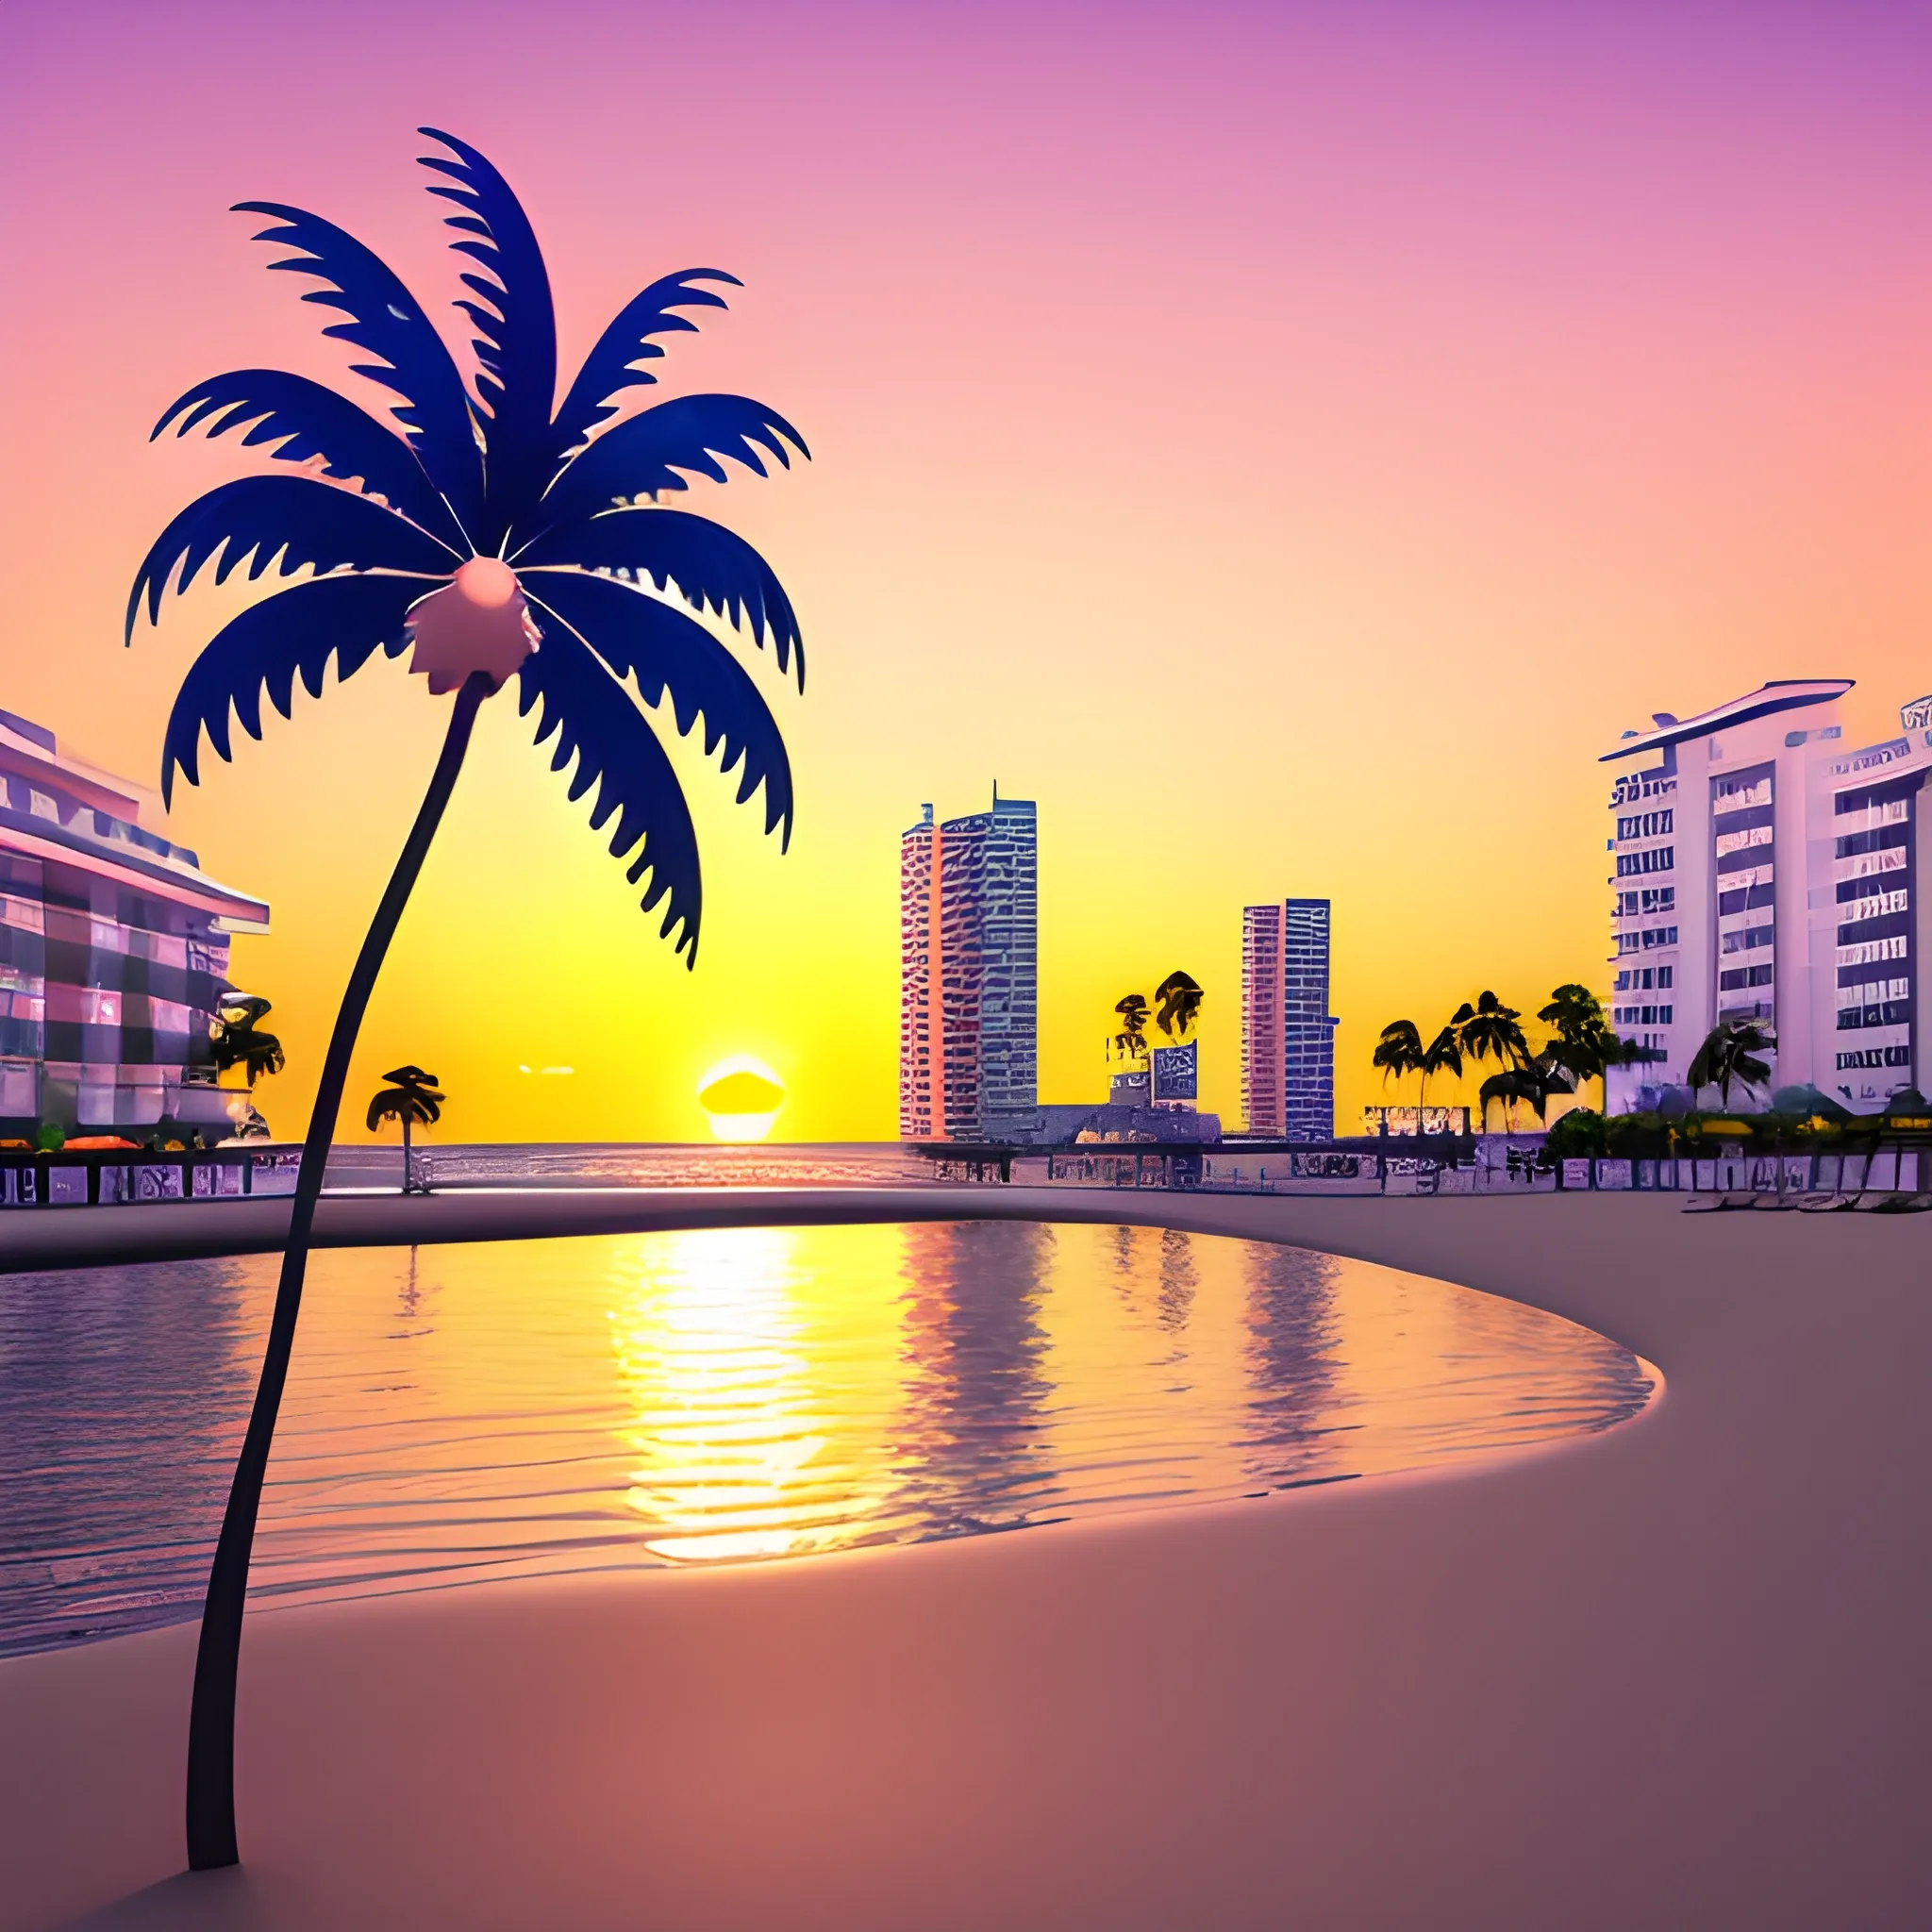 Colouring page, sunset, 3D, buildings, water, beach, one palm tree, 